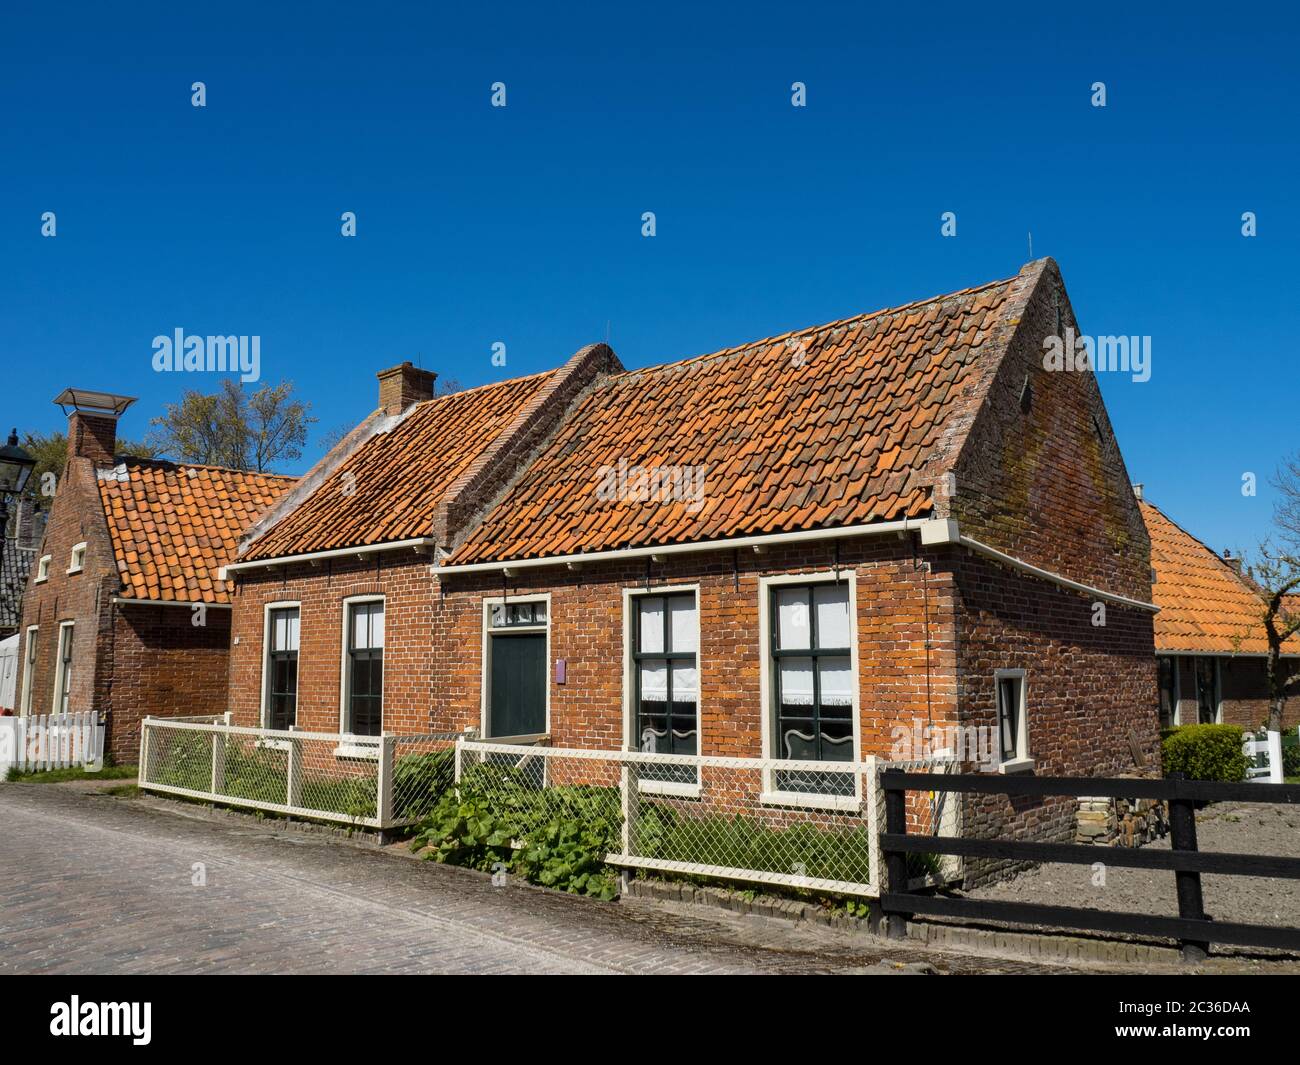 enkhuizen in the netherlands Stock Photo